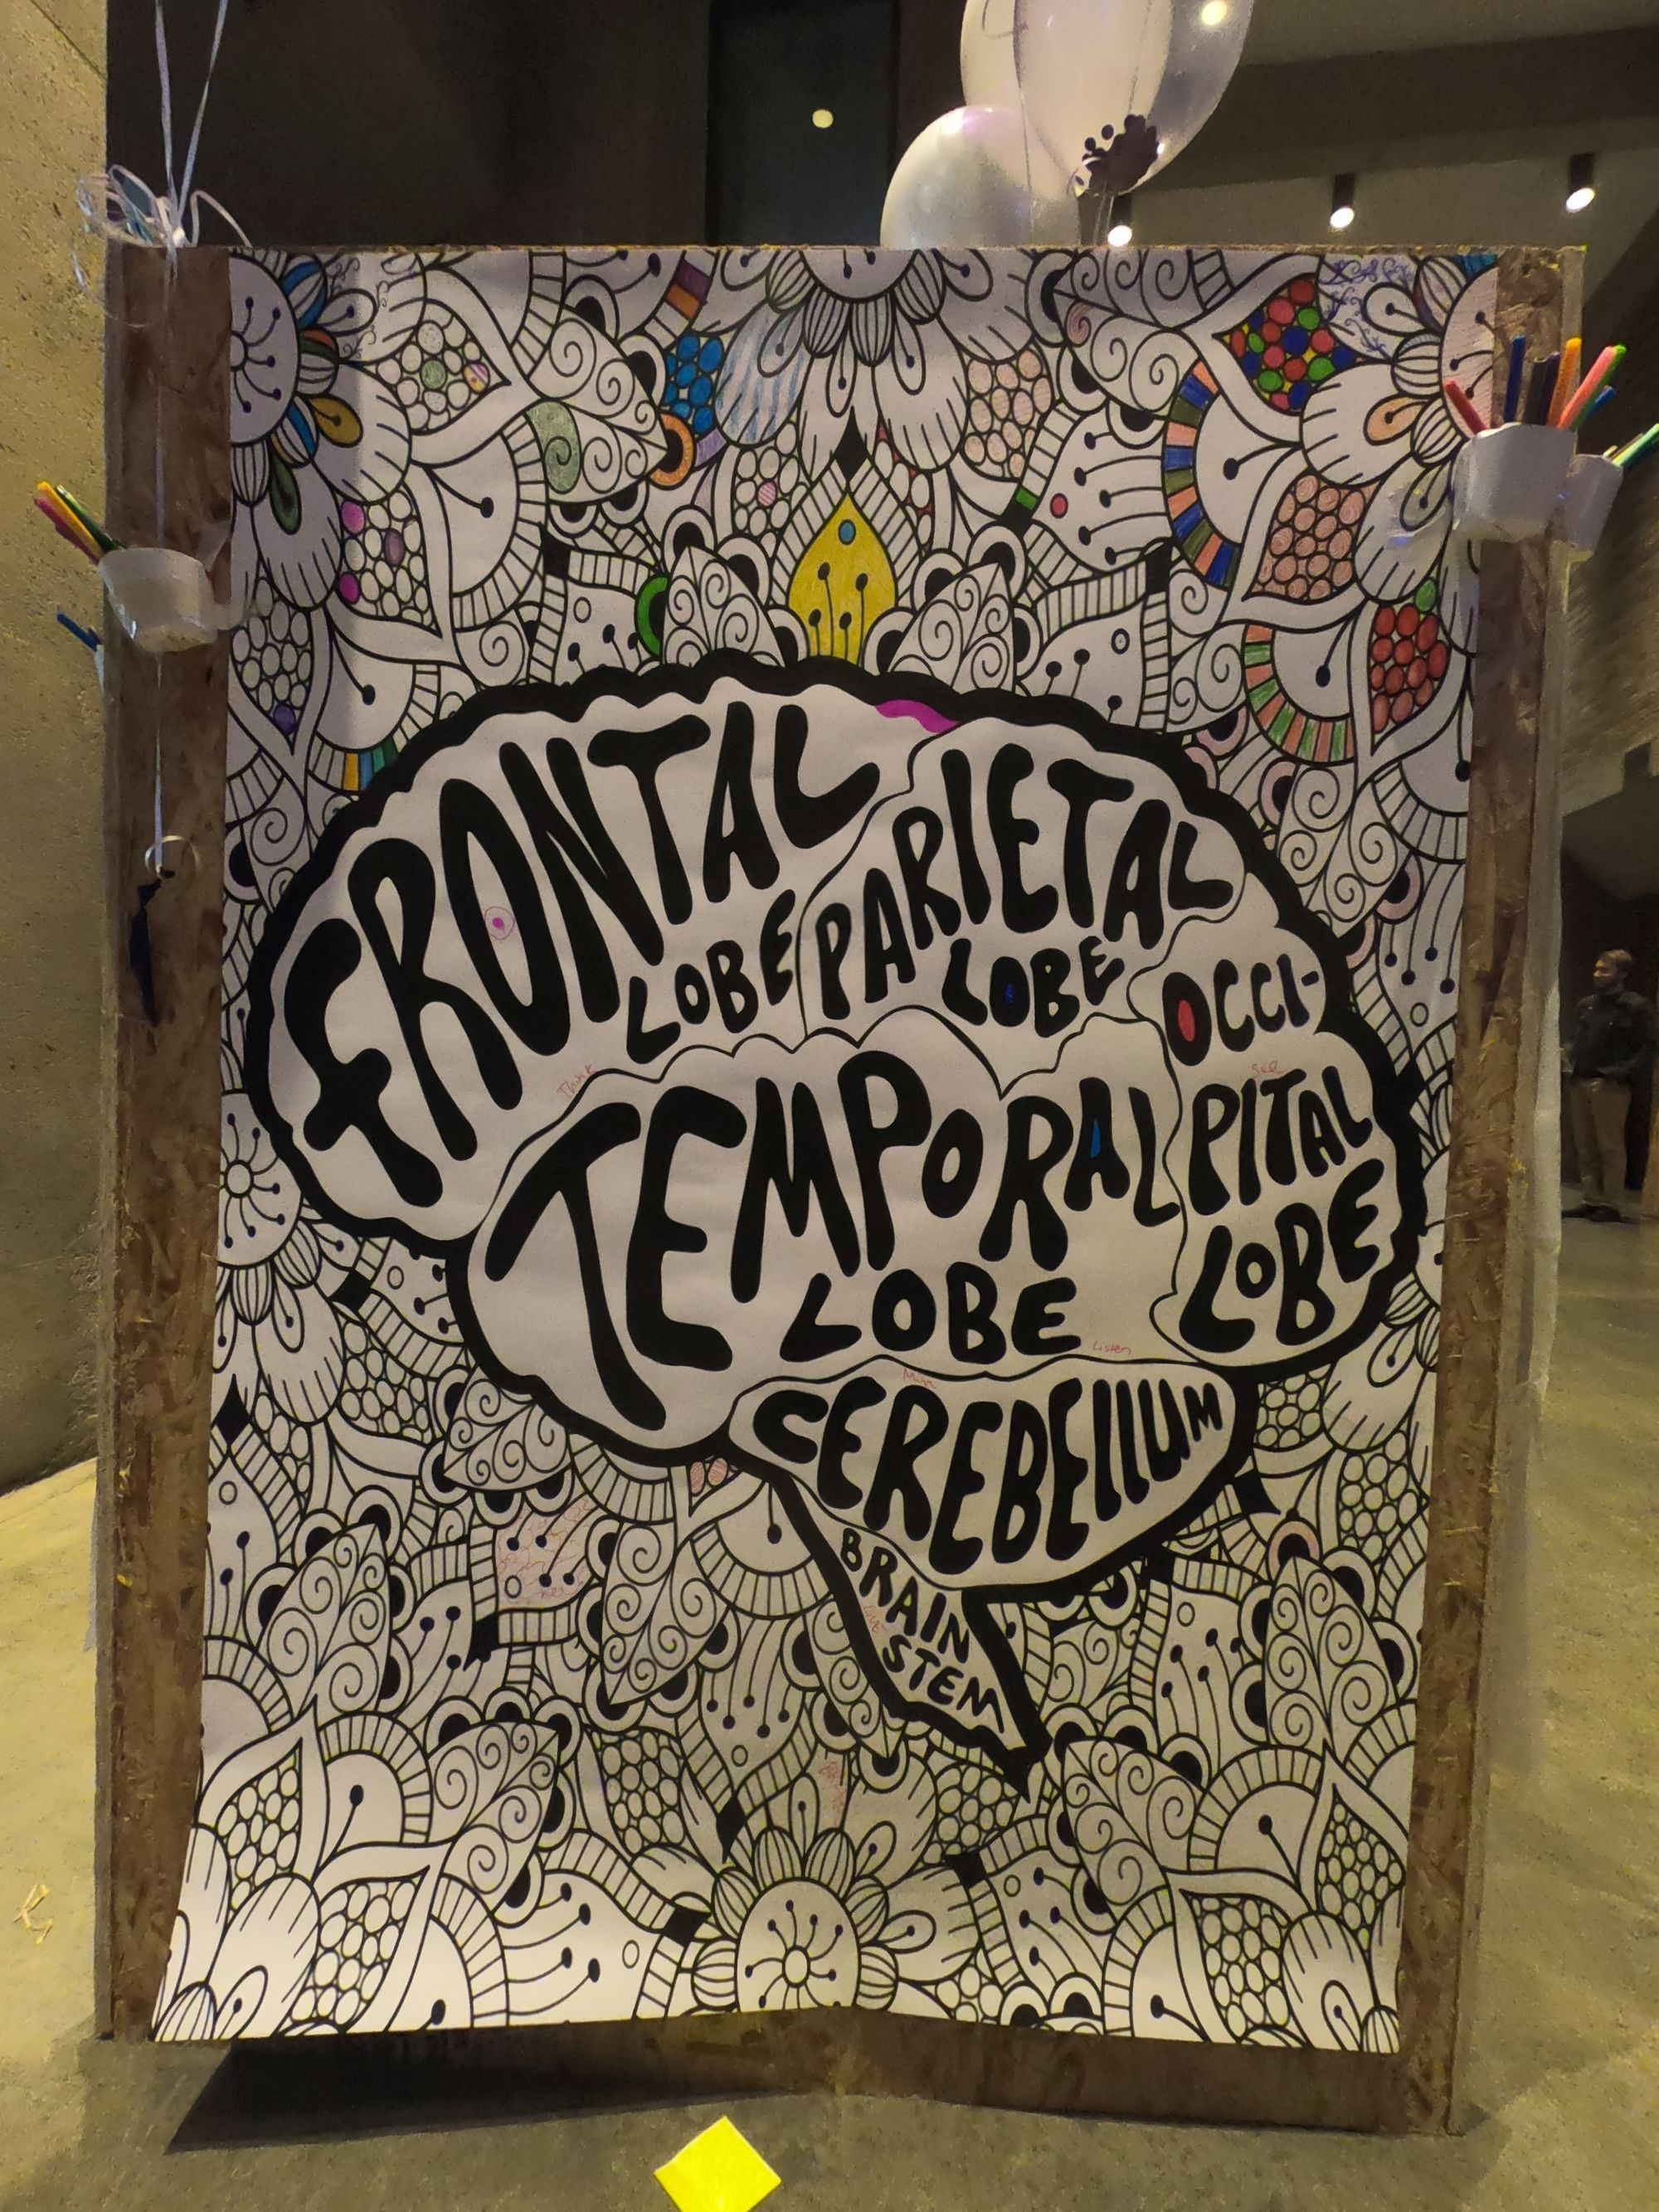 An art piece in black ink, featuring a brain with the four lobes labeled, as well as intricate designs surrounding it, which attendees filled in with color before the panel discussion.